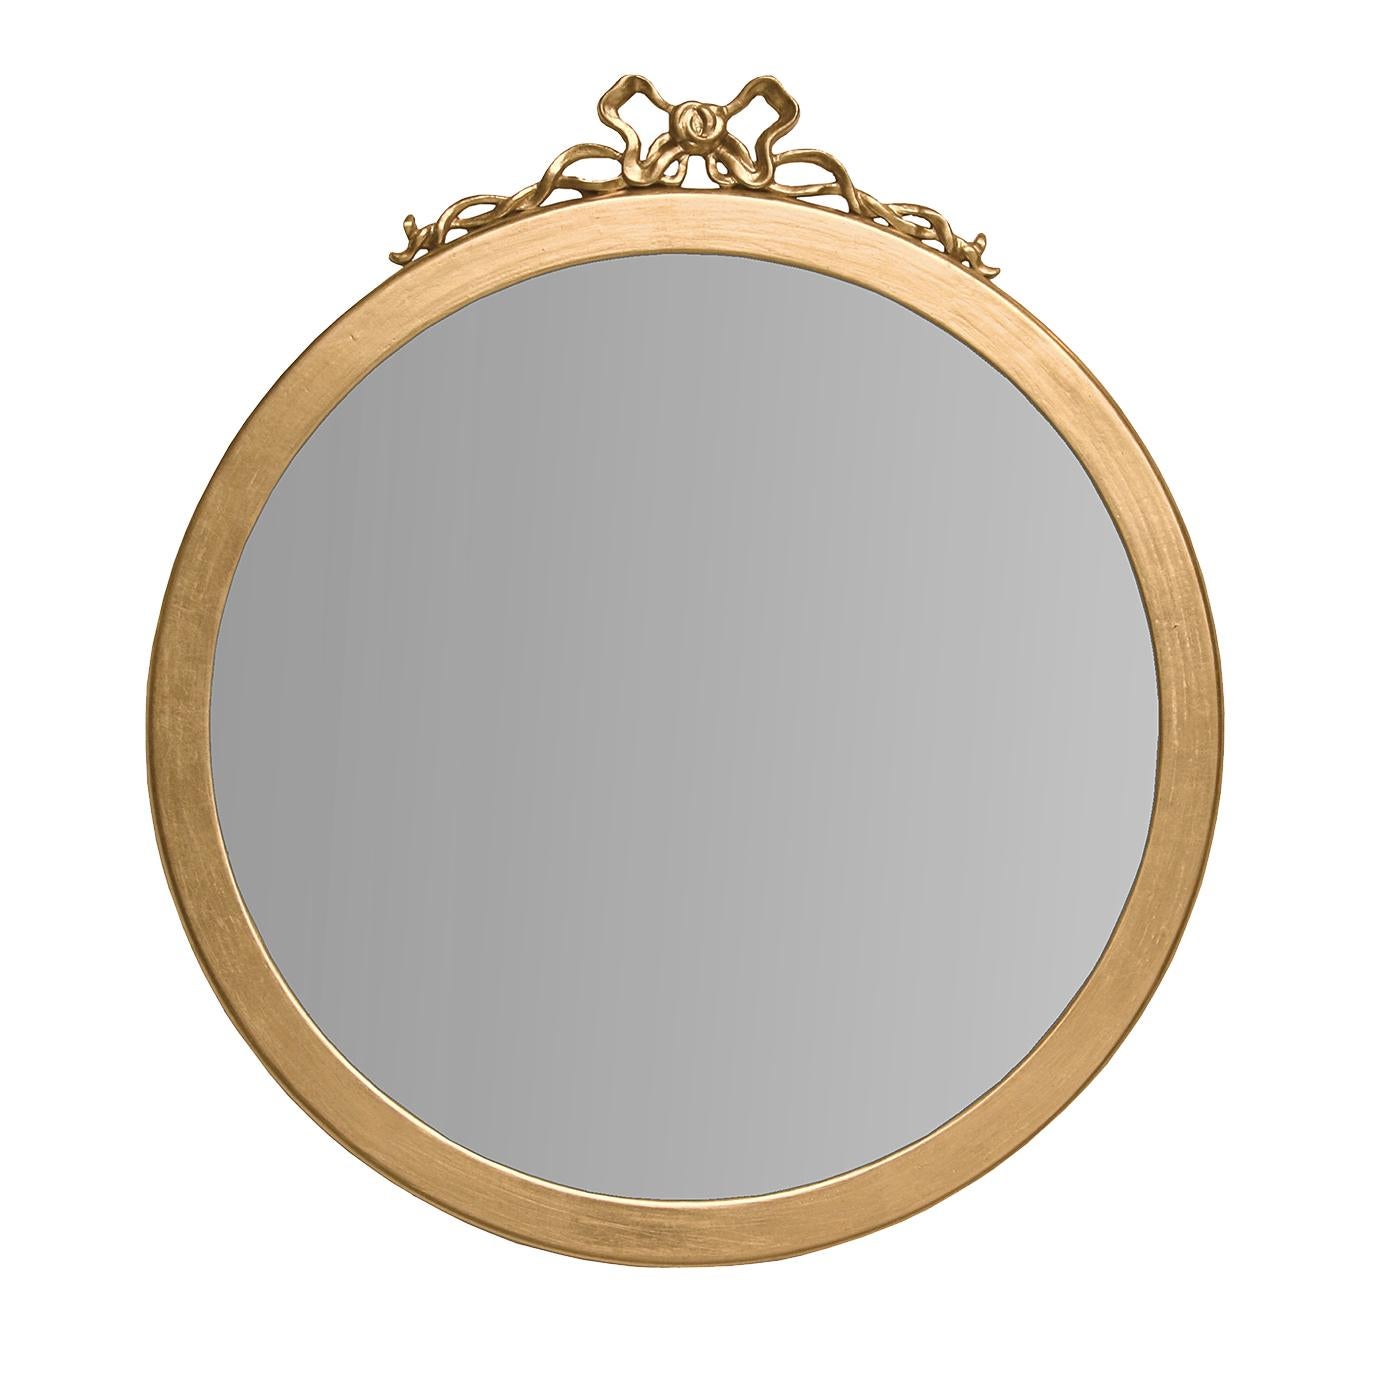 This round mirror will be an exquisite addition to a classically decorated home. Either in a powder room, in an entryway, or to brighten up a wall in the living room, this piece of functional decor is a magnificent example of masterful craftsmanship